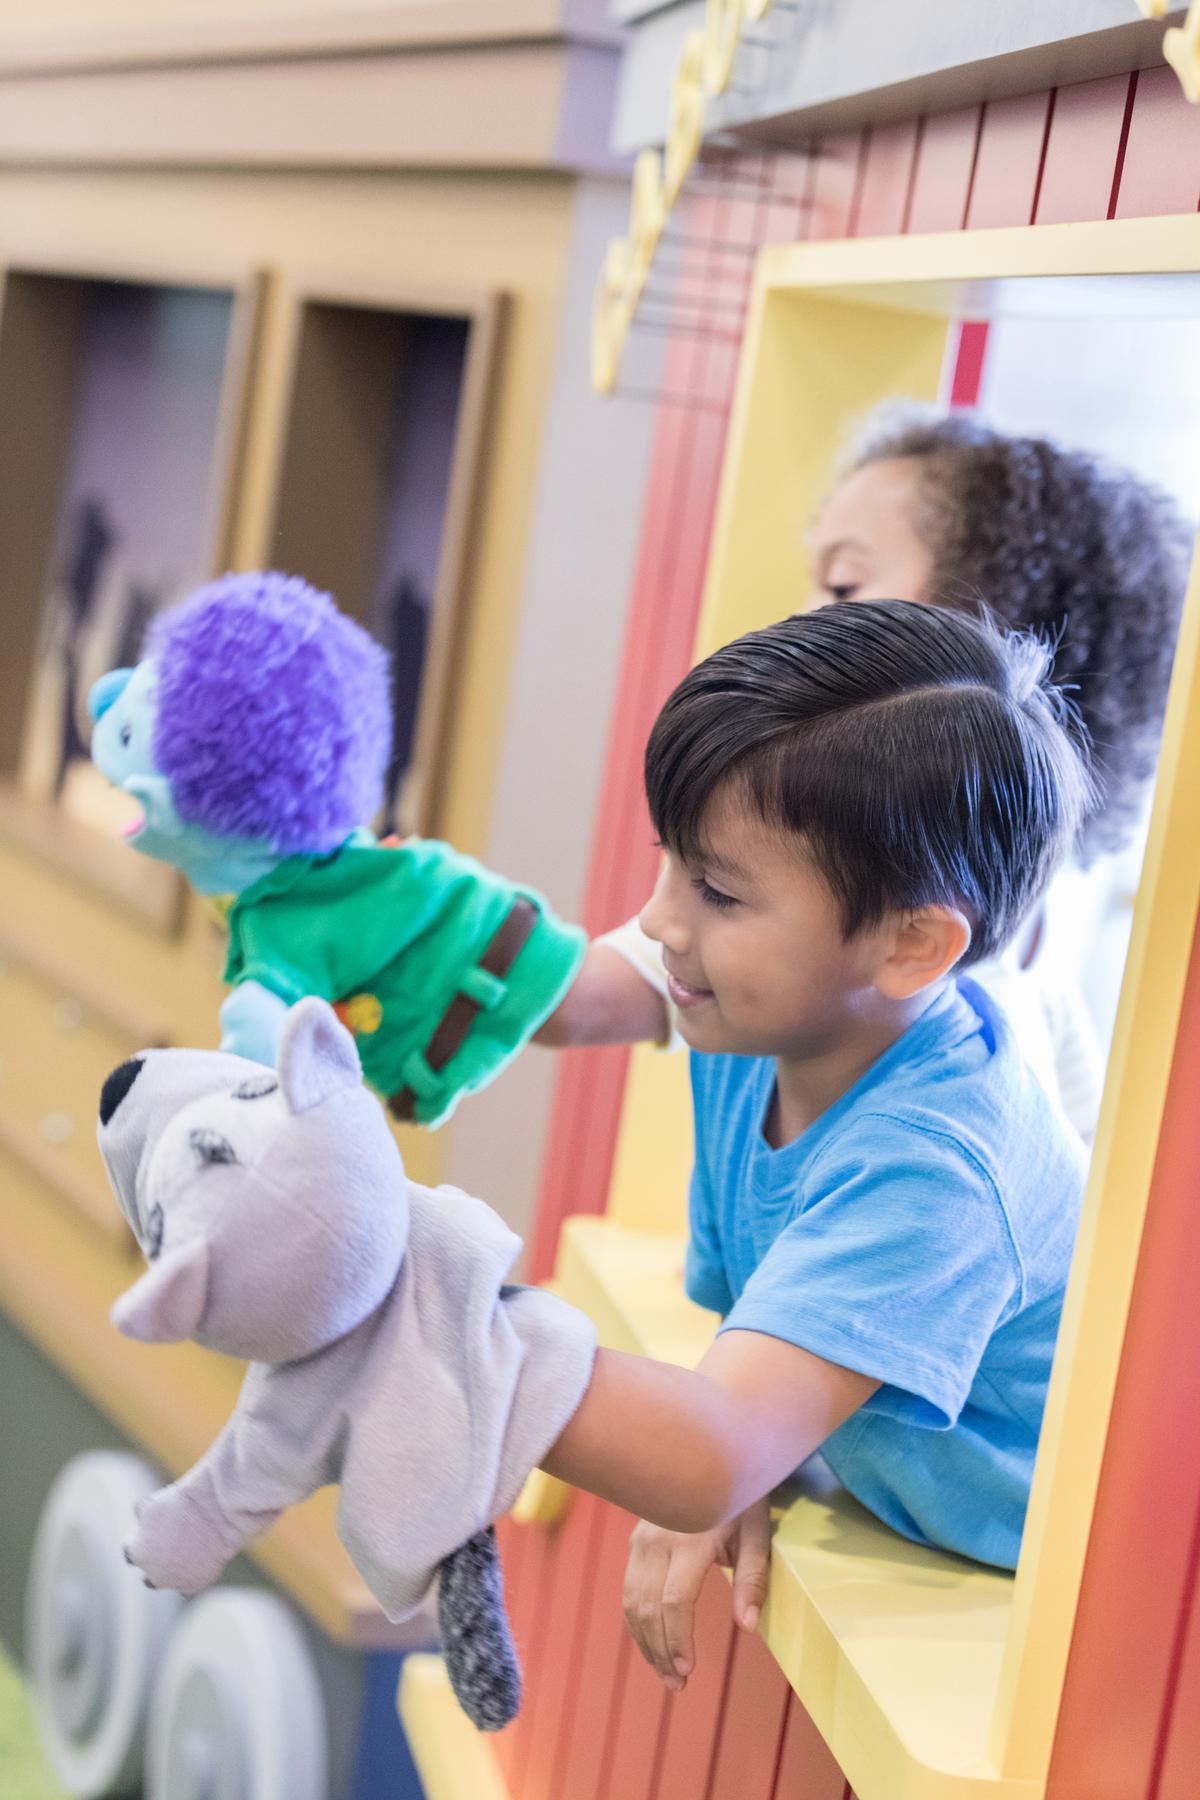 Toy libraries offer children the opportunity to experience a variety of toys, encourage sharing and social interaction